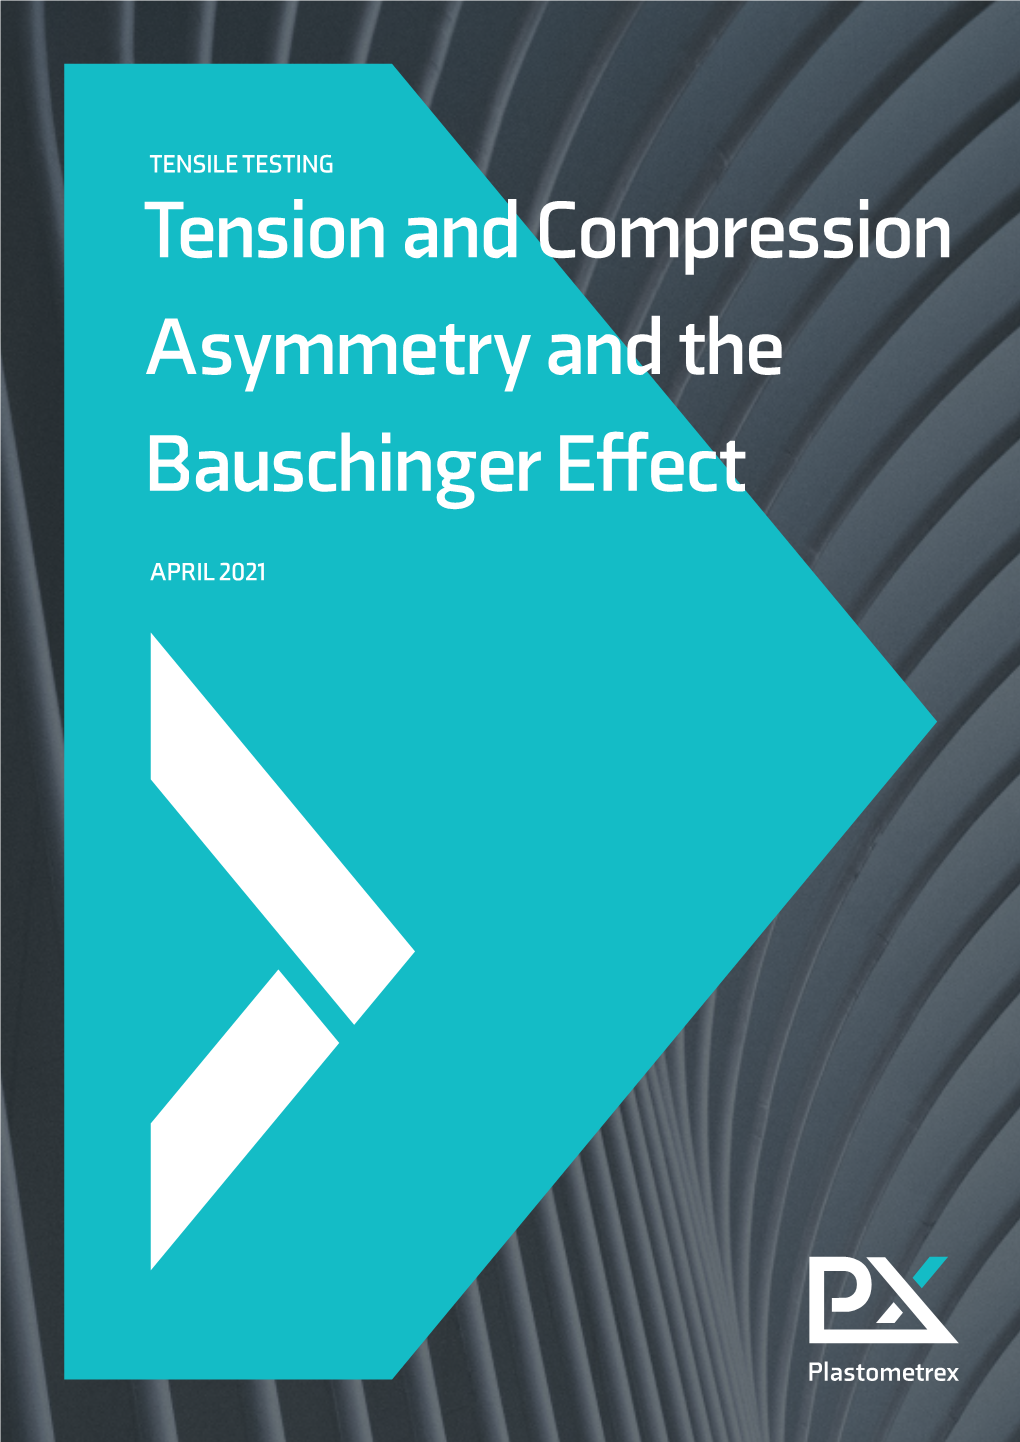 Tension and Compression Asymmetry and the Bauschinger Effect